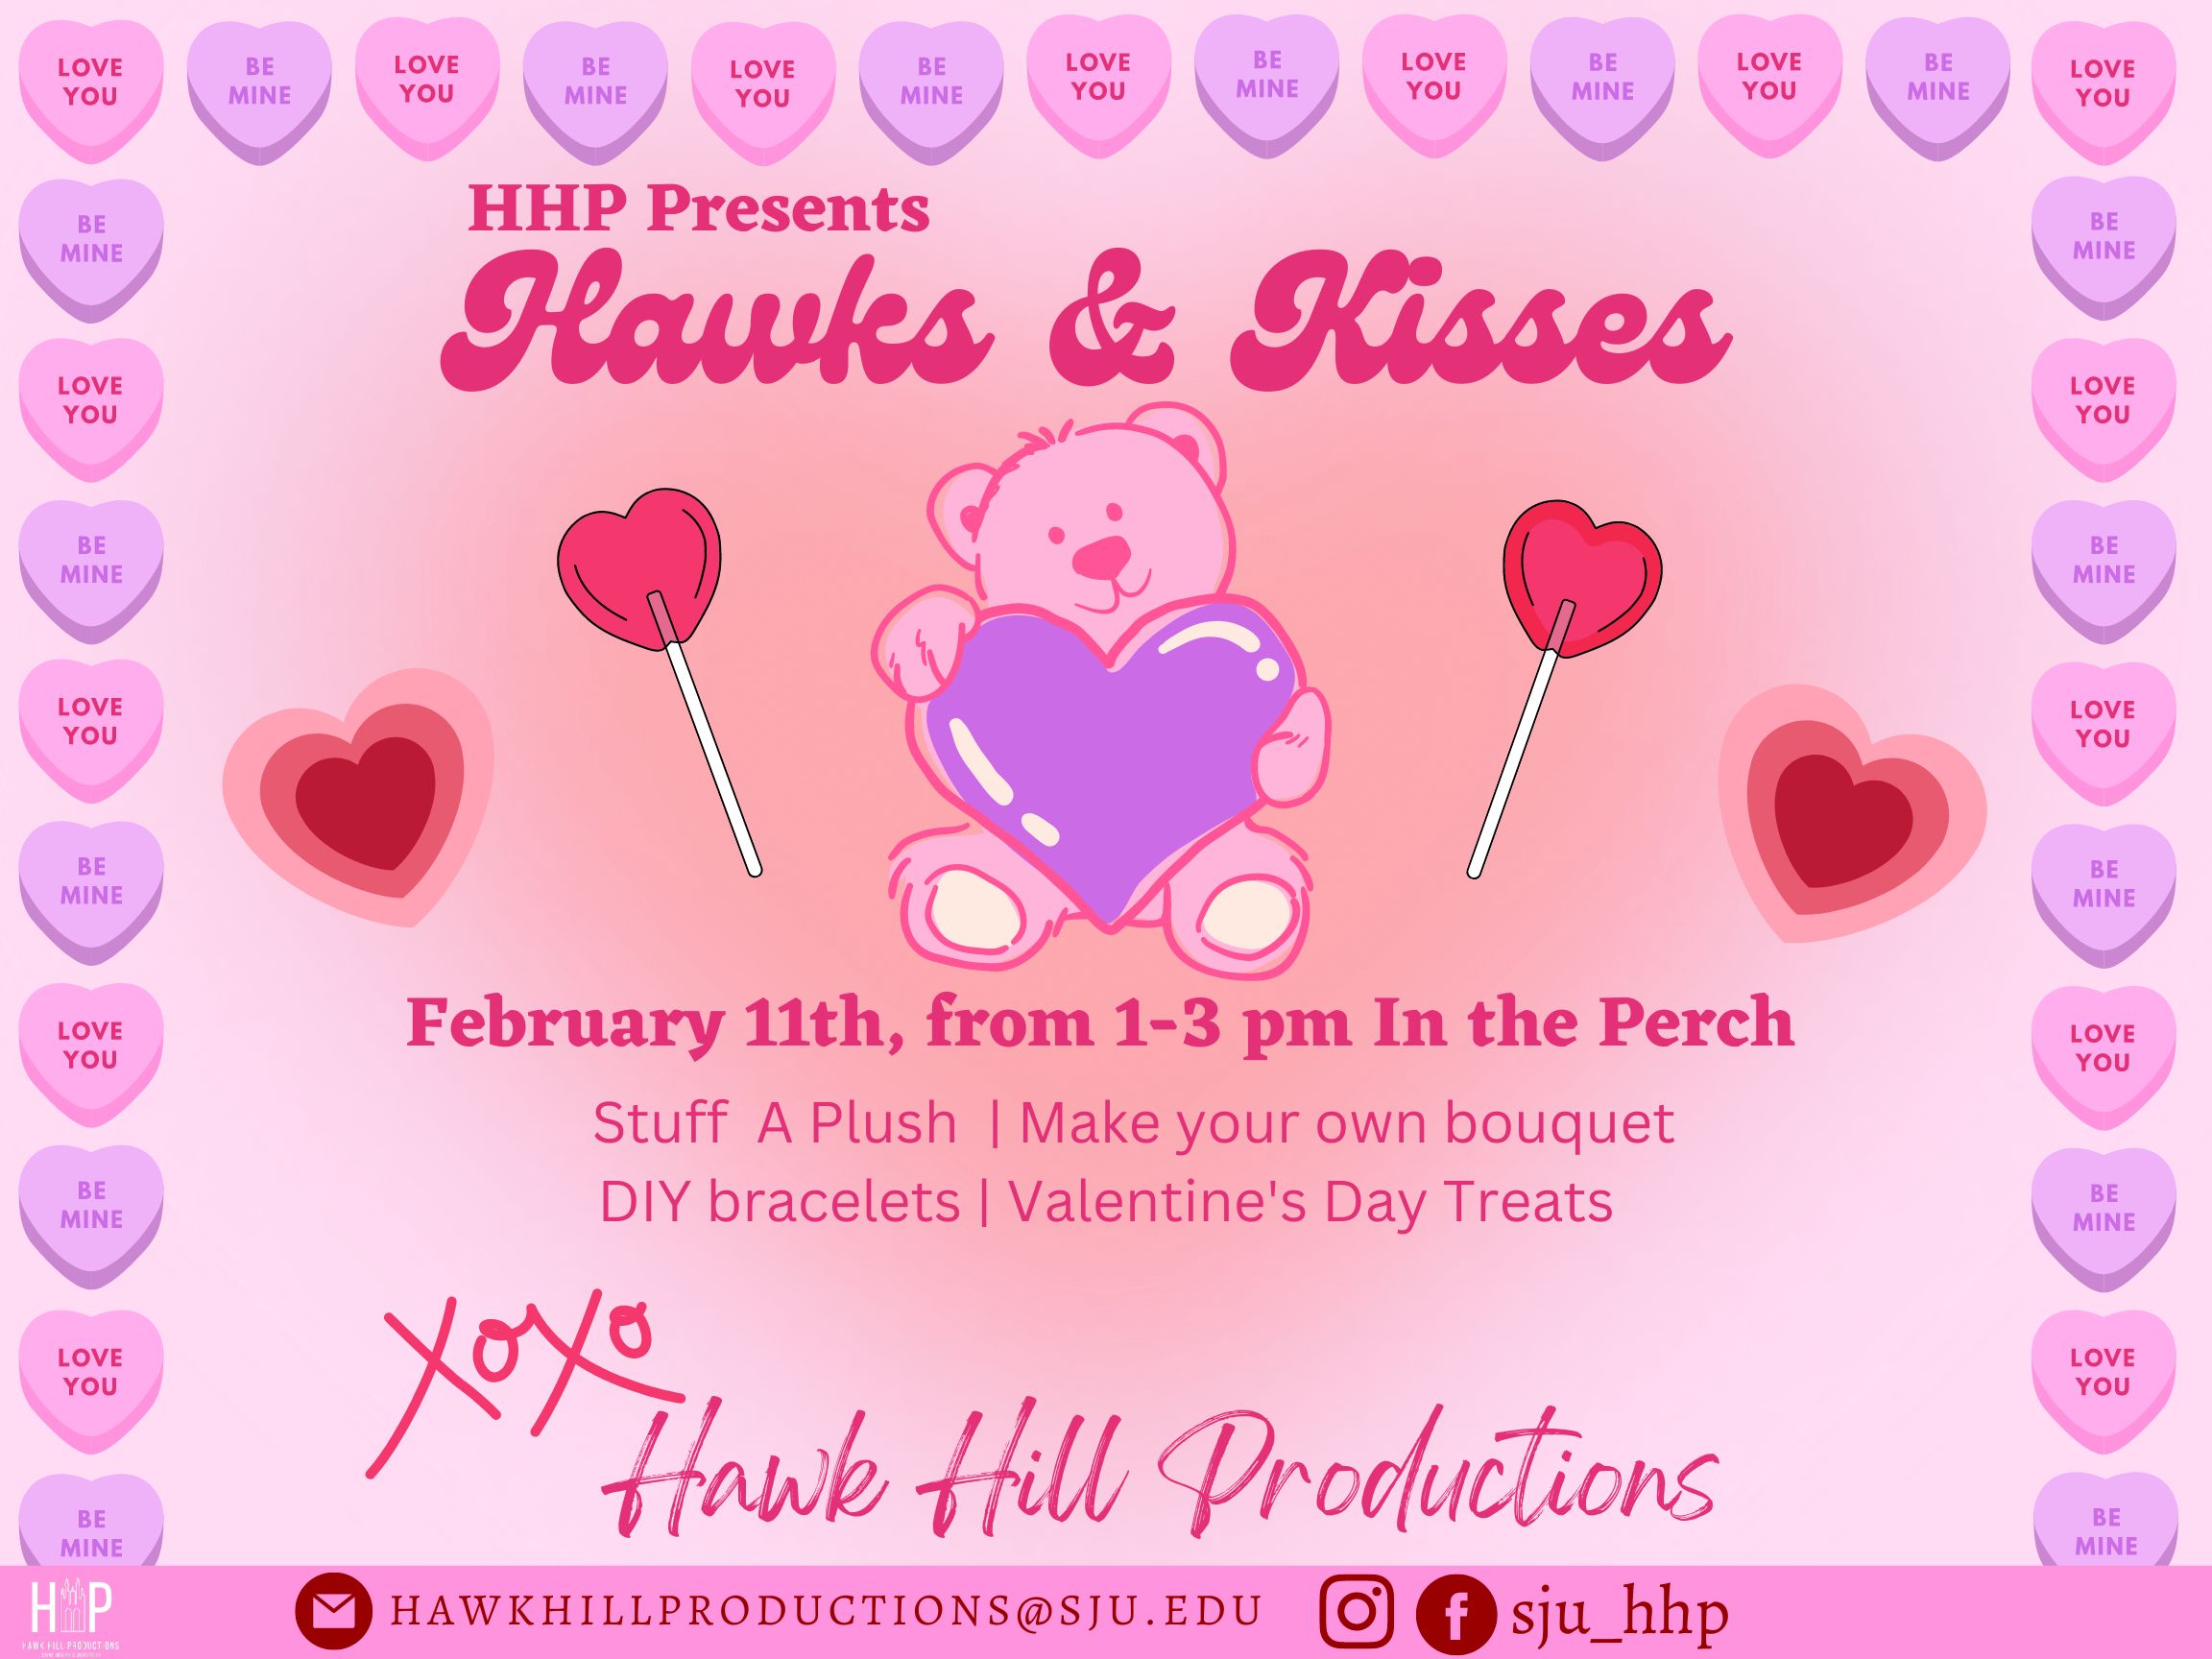 This flyer is to promote a Valentine's Day event for students called 'Hawks and Kisses'. The background of the flyer is pink and there are purple and darker pink conversation hearts lining the edge of the flyer. There is a pink bear holding a heart in the center of the flyer.